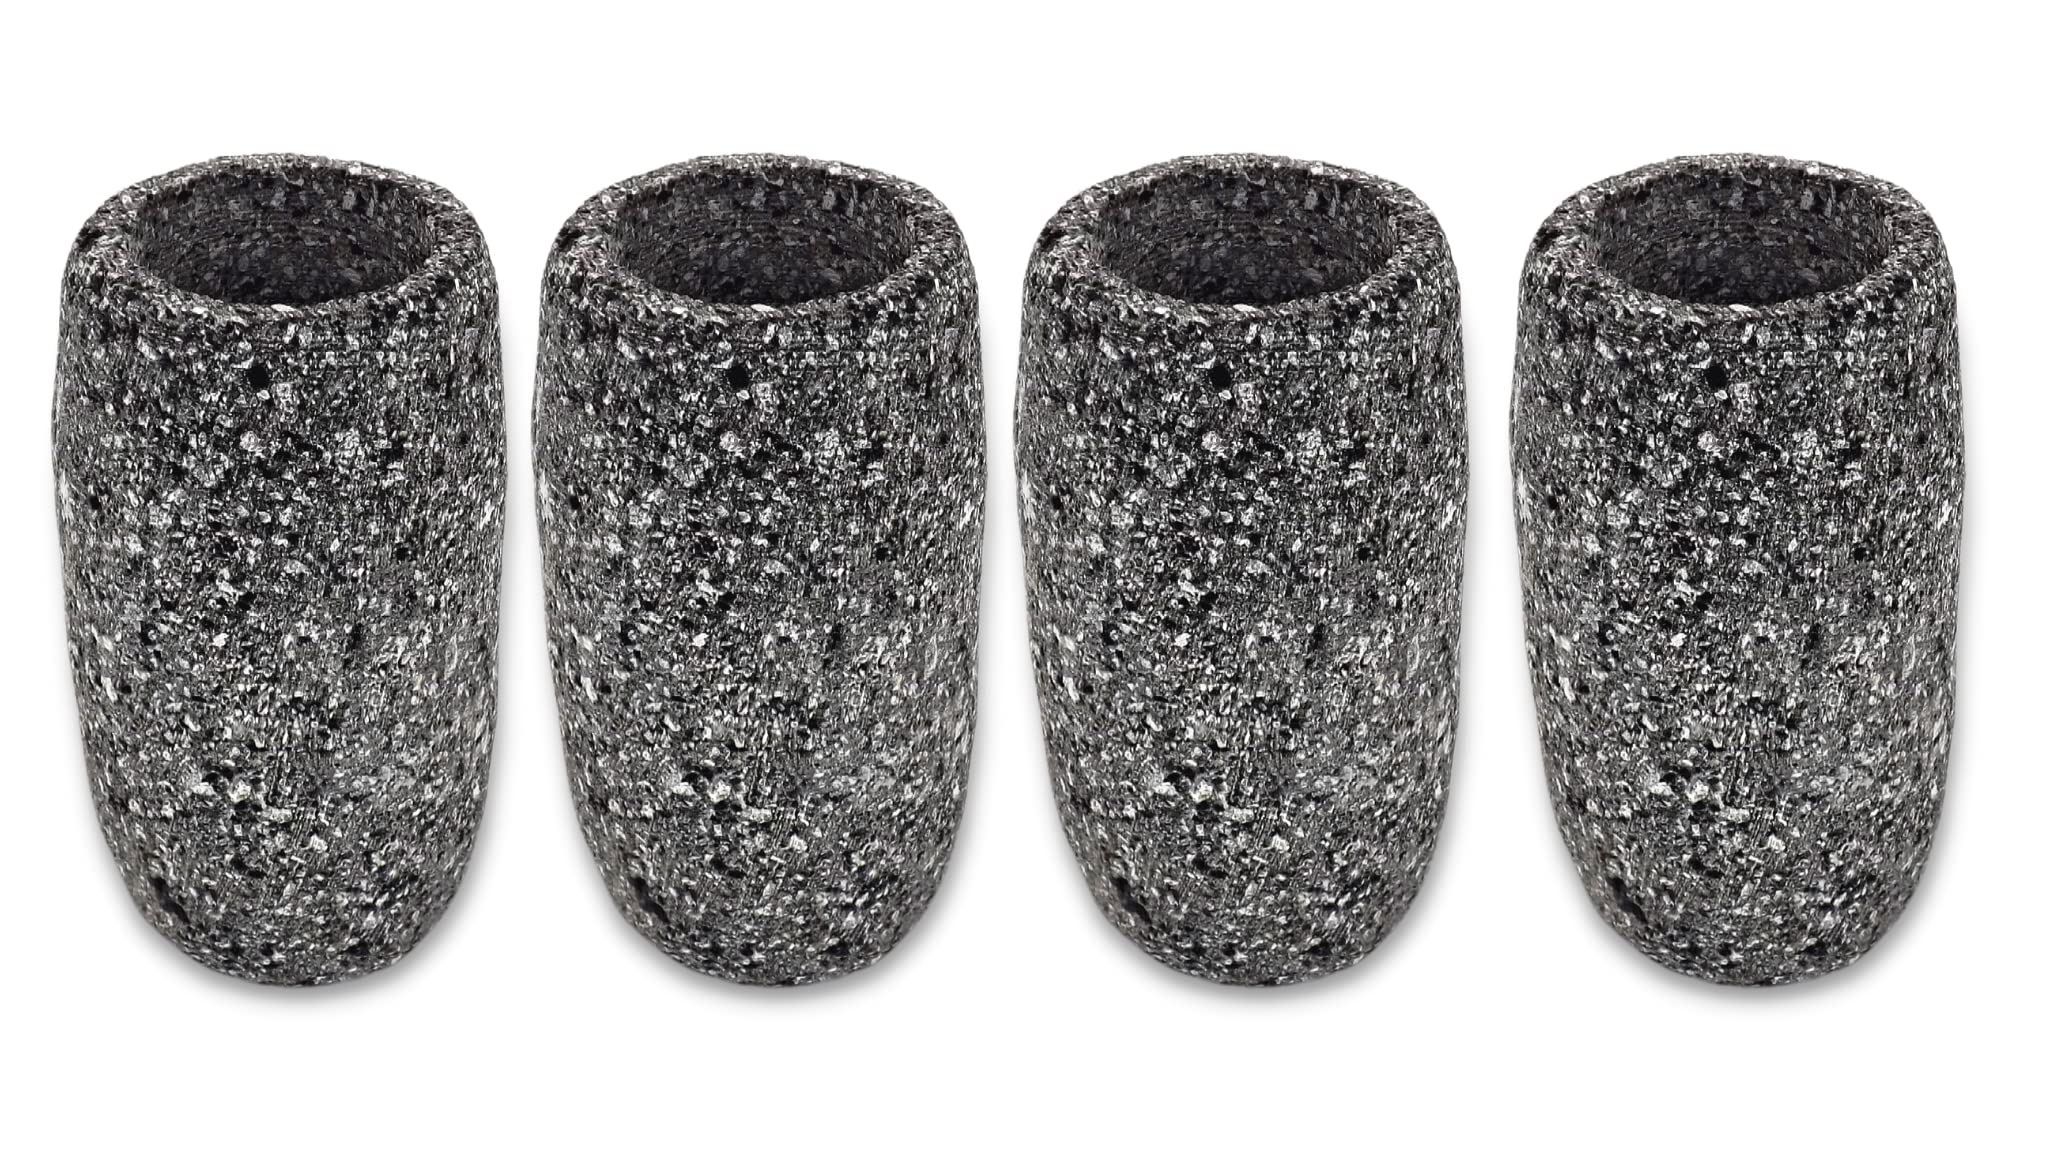 MEXTEQUIL - Volcanic Stone Shot Glasses - Set of Natural Shot Glass - 1.5 Oz - 100% Organic & Eco friendly - Natural Basalt Rock (4 pieces)